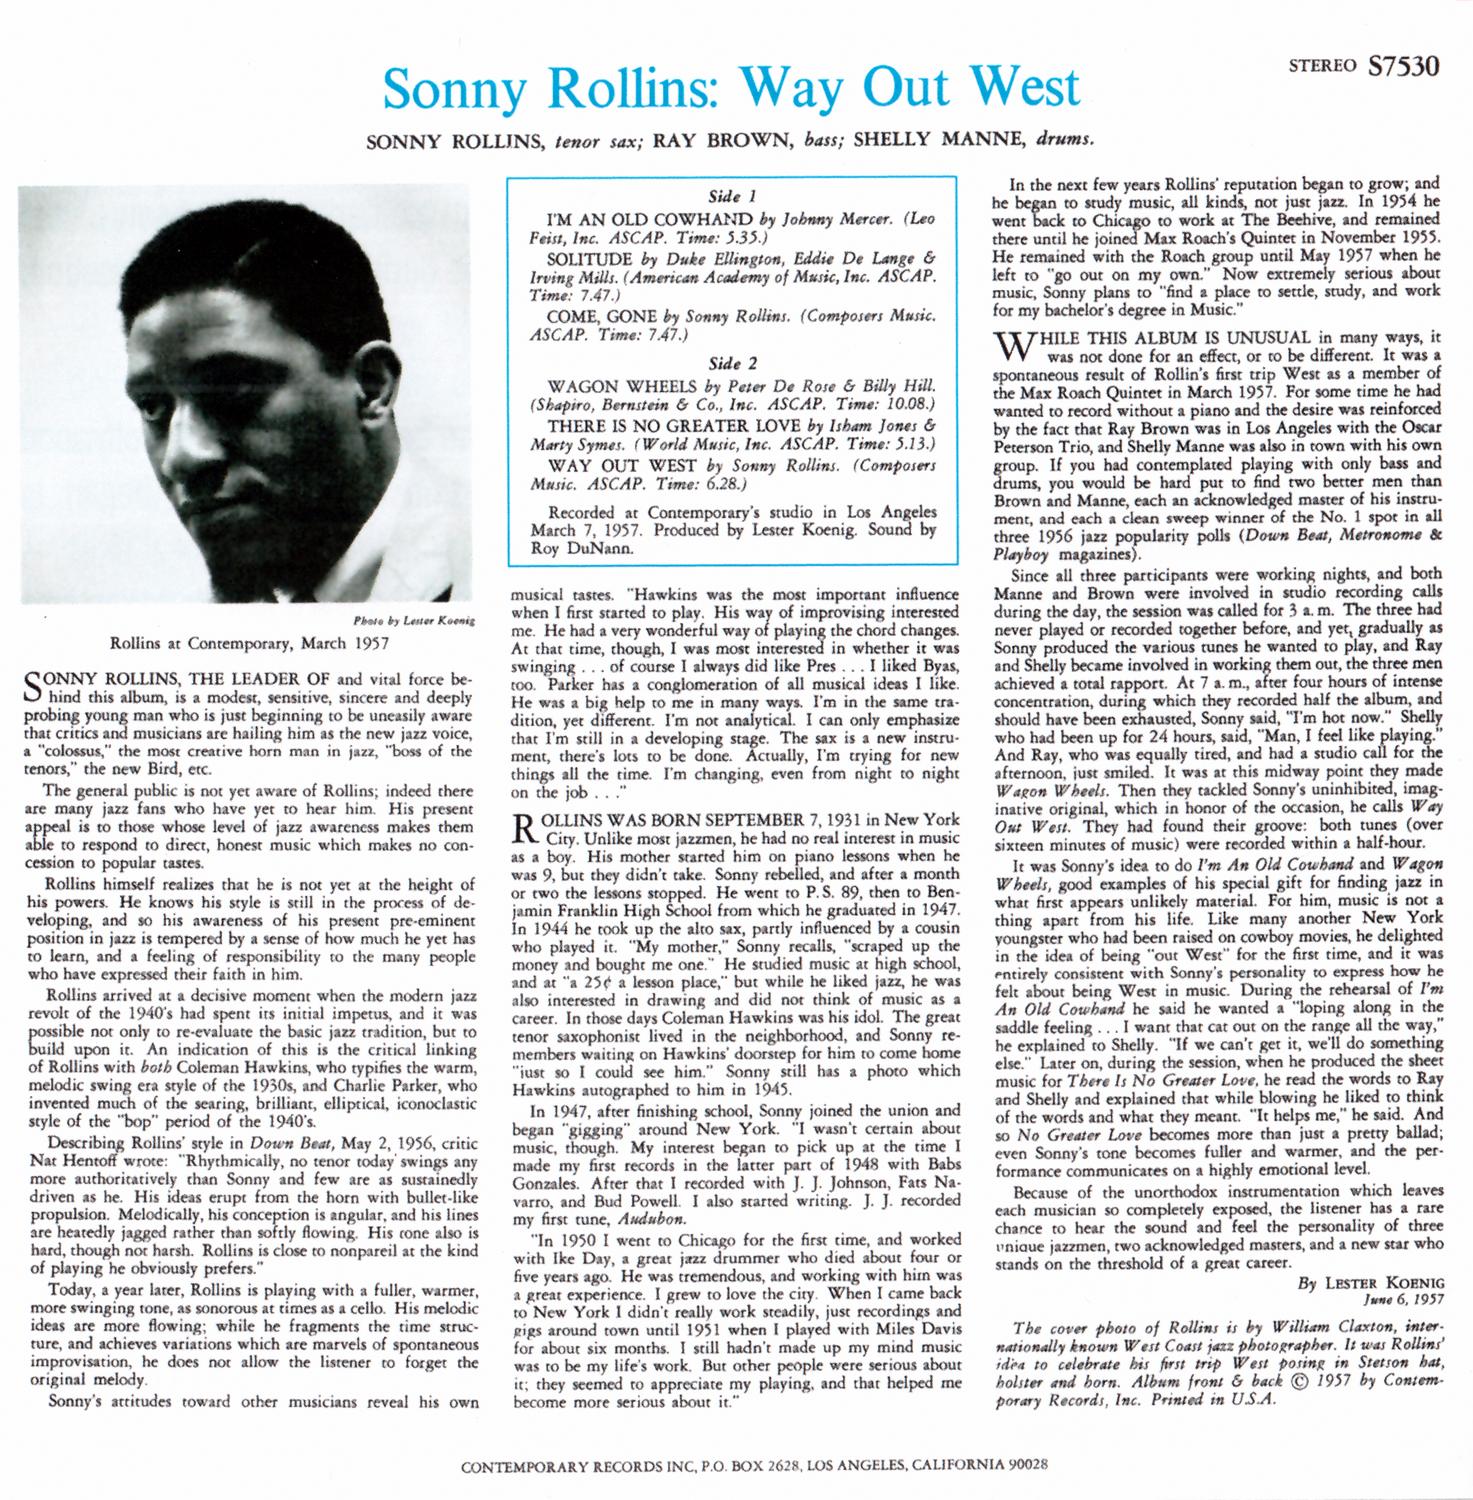 Sonny Rollins [Moving Out 1954] More Than You Know